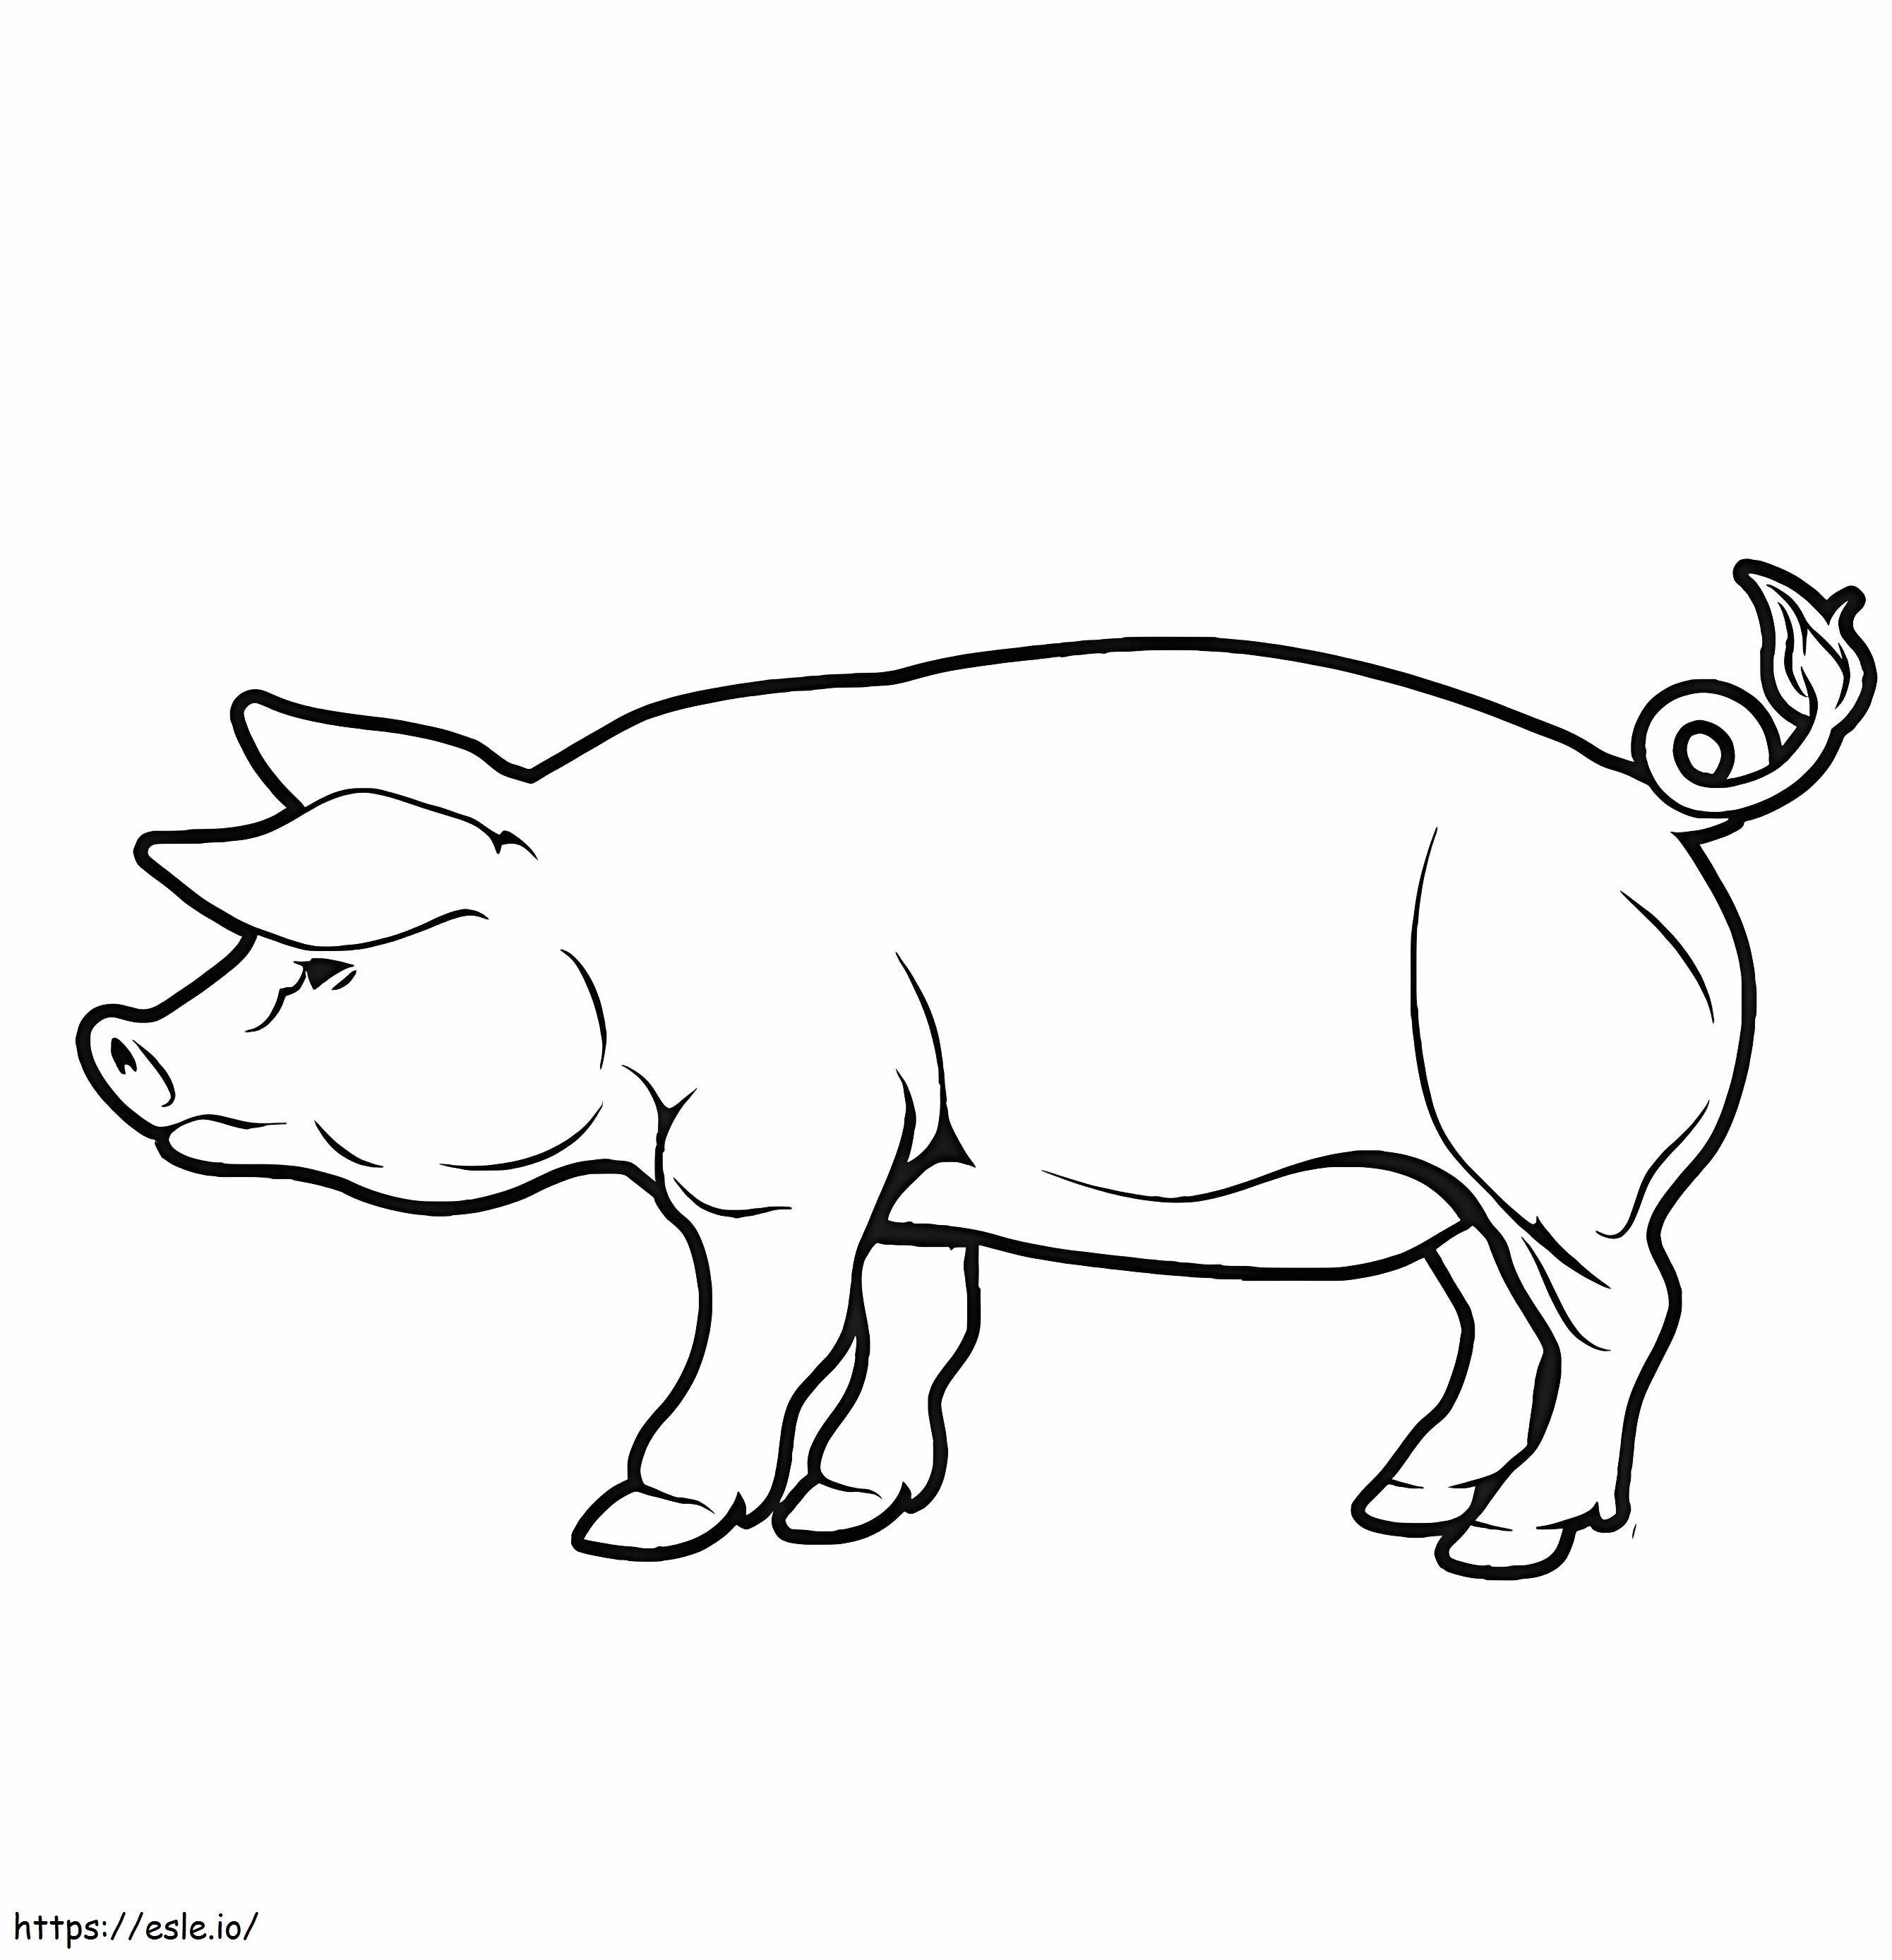 Normal Pig 3 coloring page